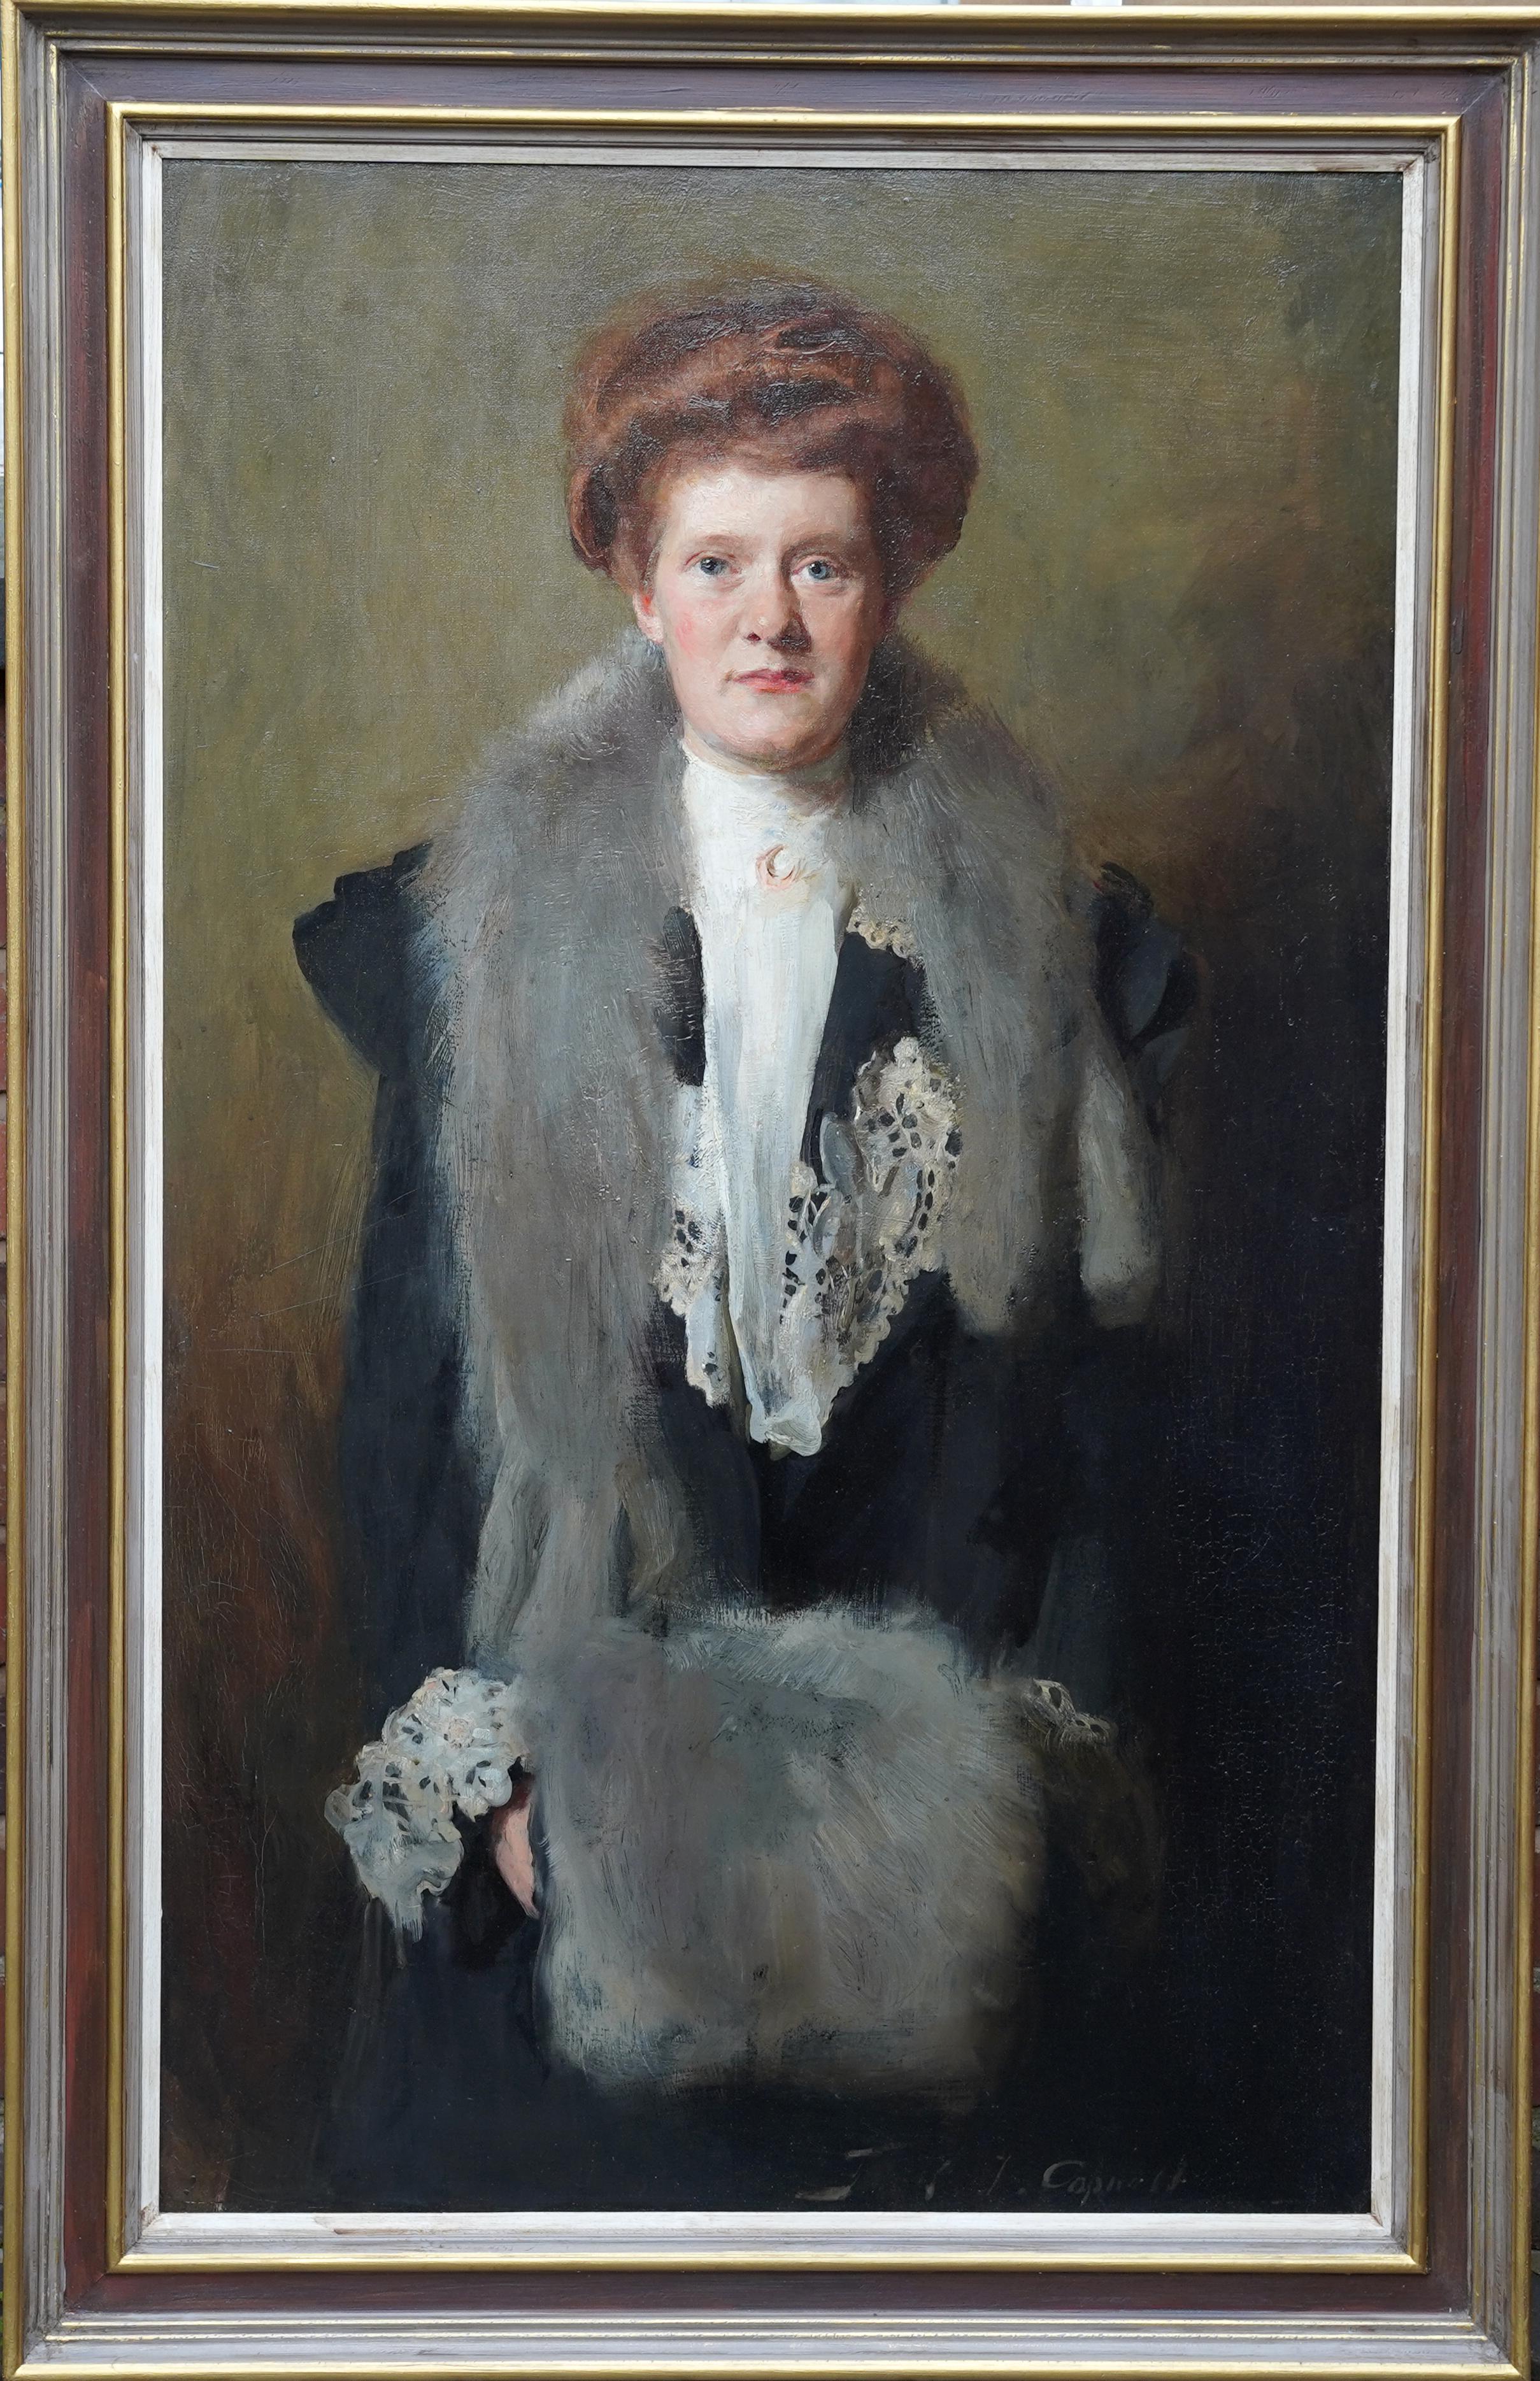 Frank Thomas Copnall Portrait Painting - Portrait of a Lady in Stole and Muff - British Edwardian art oil painting